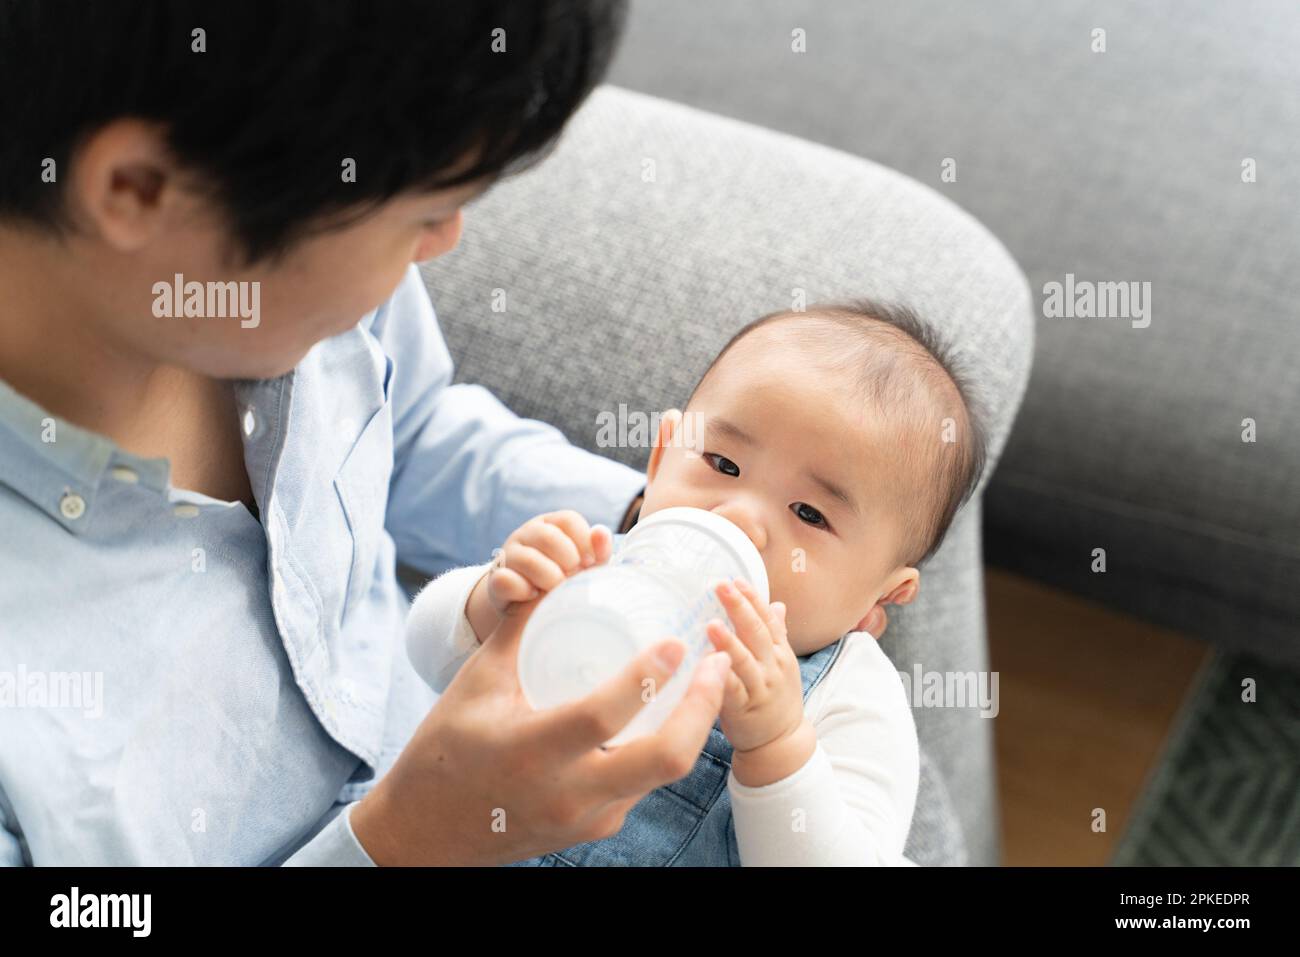 https://c8.alamy.com/comp/2PKEDPR/father-sitting-on-couch-feeding-baby-2PKEDPR.jpg